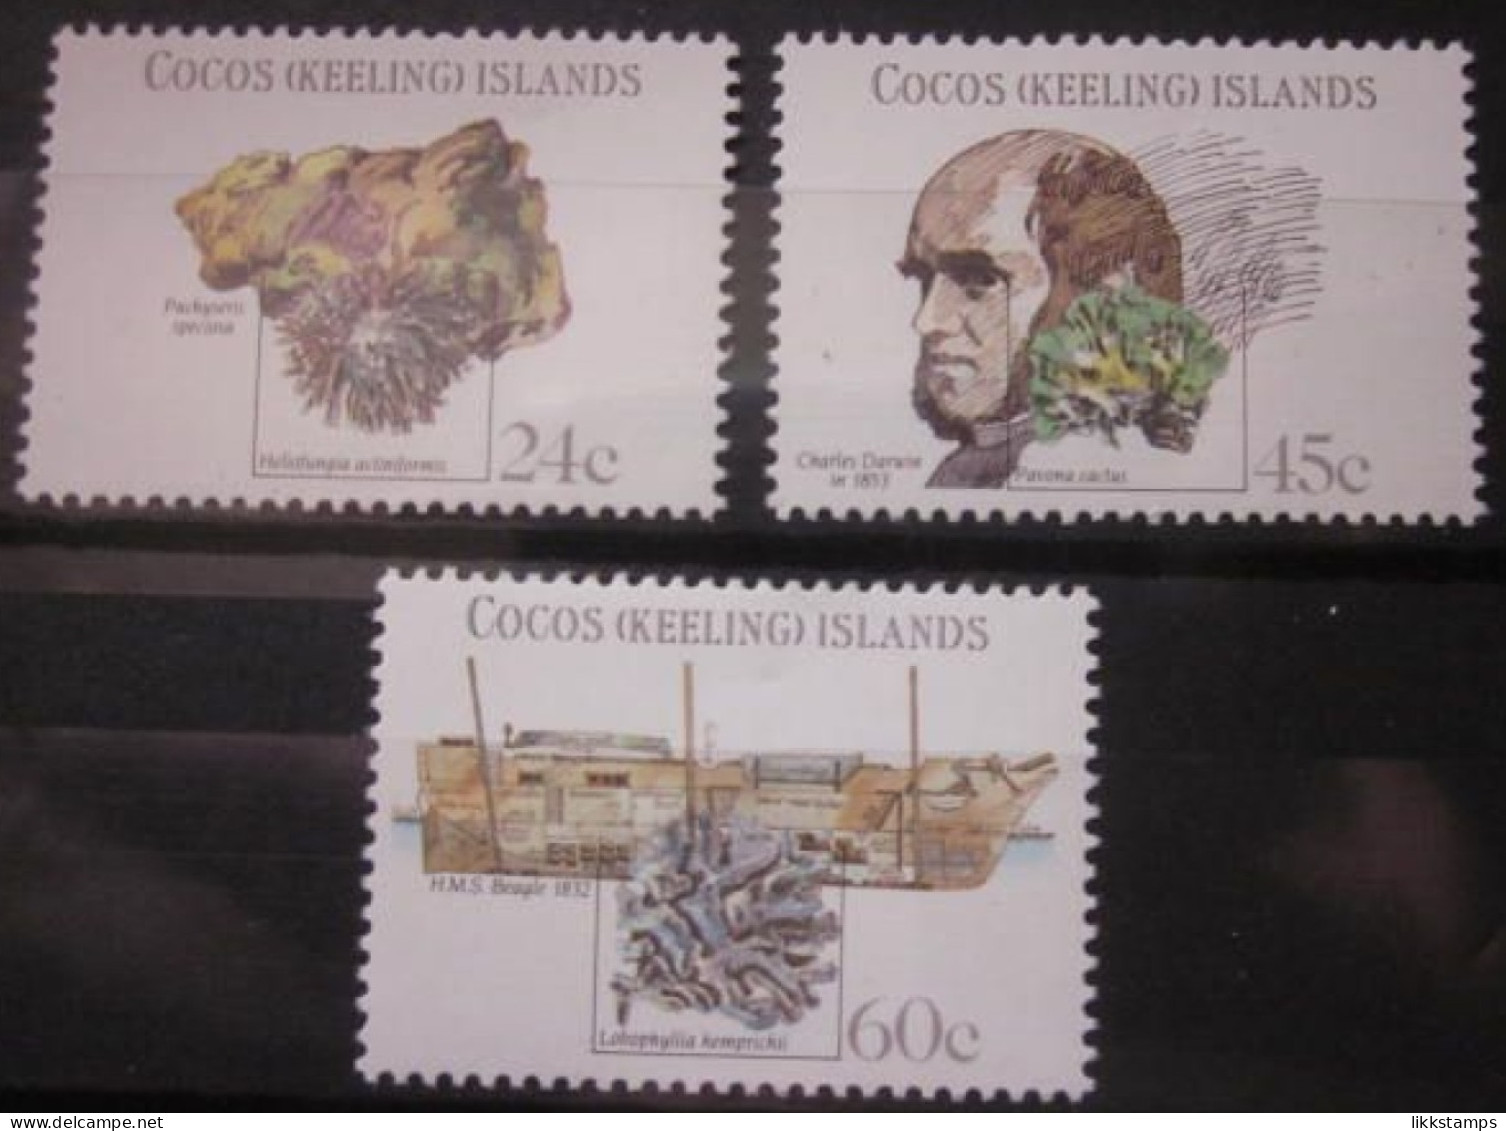 COCOS (KEELING) ISLANDS 1981 ~ S.G. 75 - 77, ~ THE 150th ANNIVERSARY OF CHARLES DARWIN'S VOYAGE. ~  MNH #02933 - Cocos (Keeling) Islands